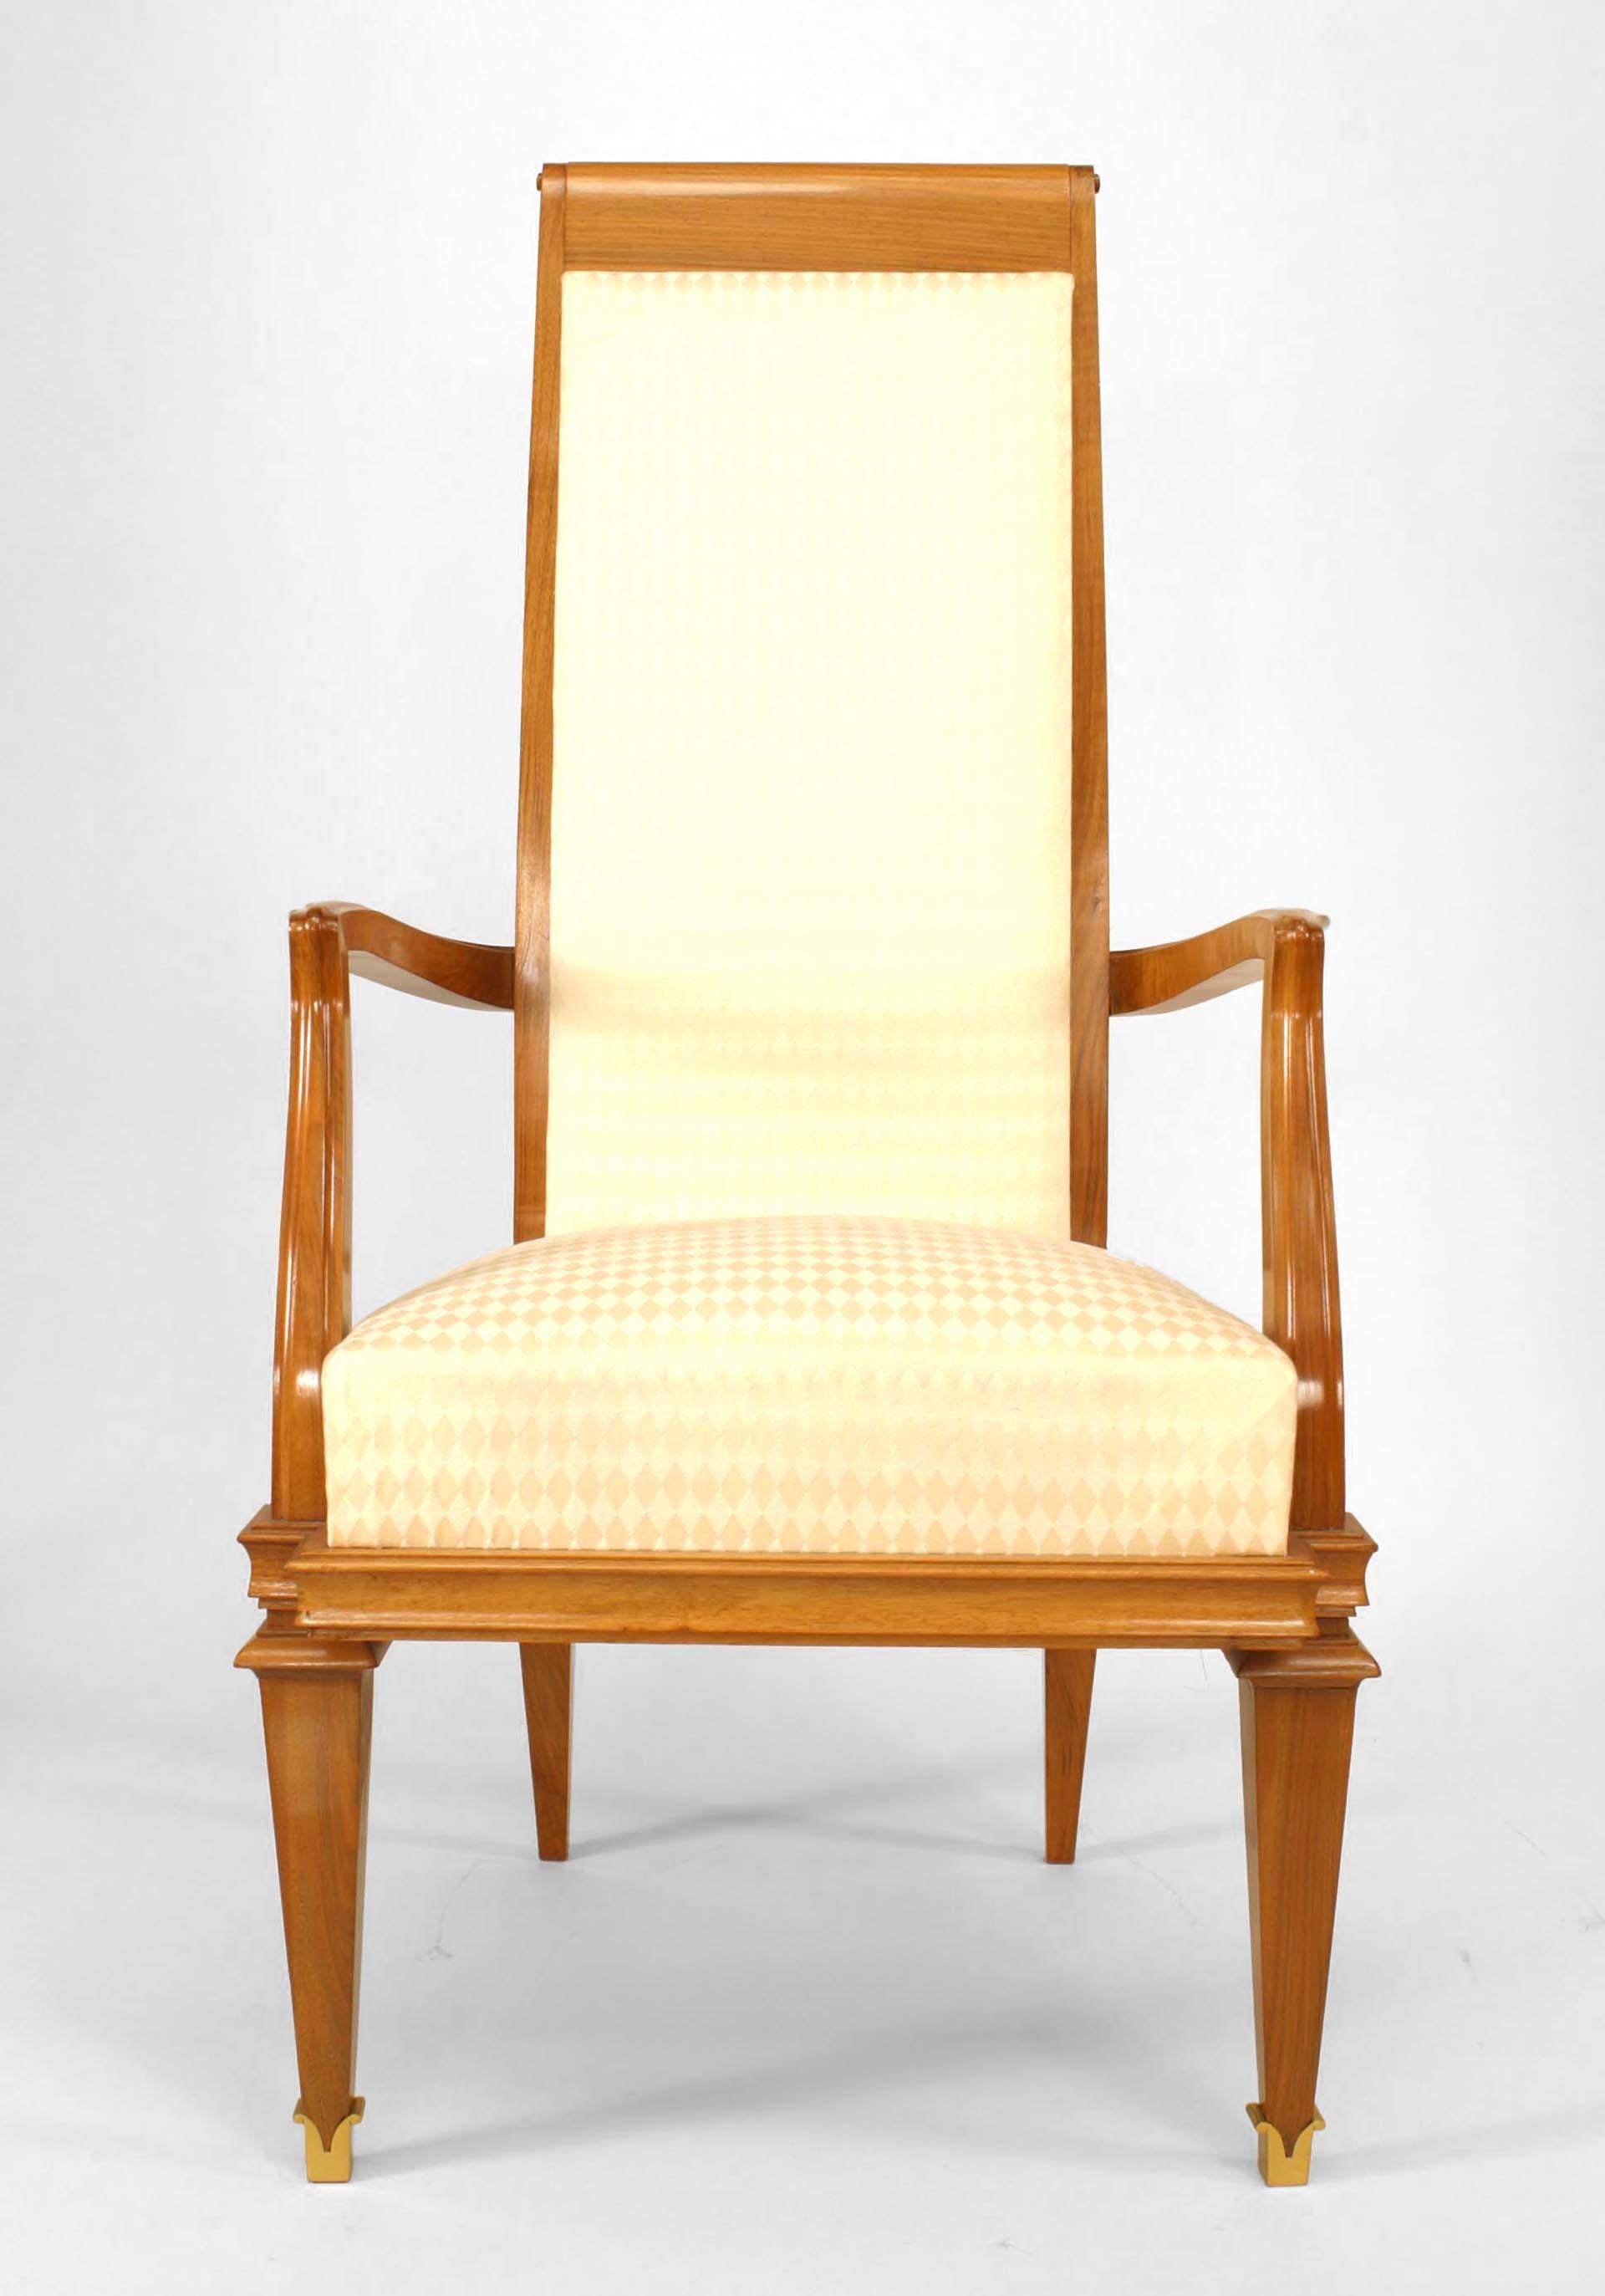 Set of 10 French 1940s brass mounted walnut high backed open arm chairs upholstered in white muslin (att: ROGER Le MANACH)
